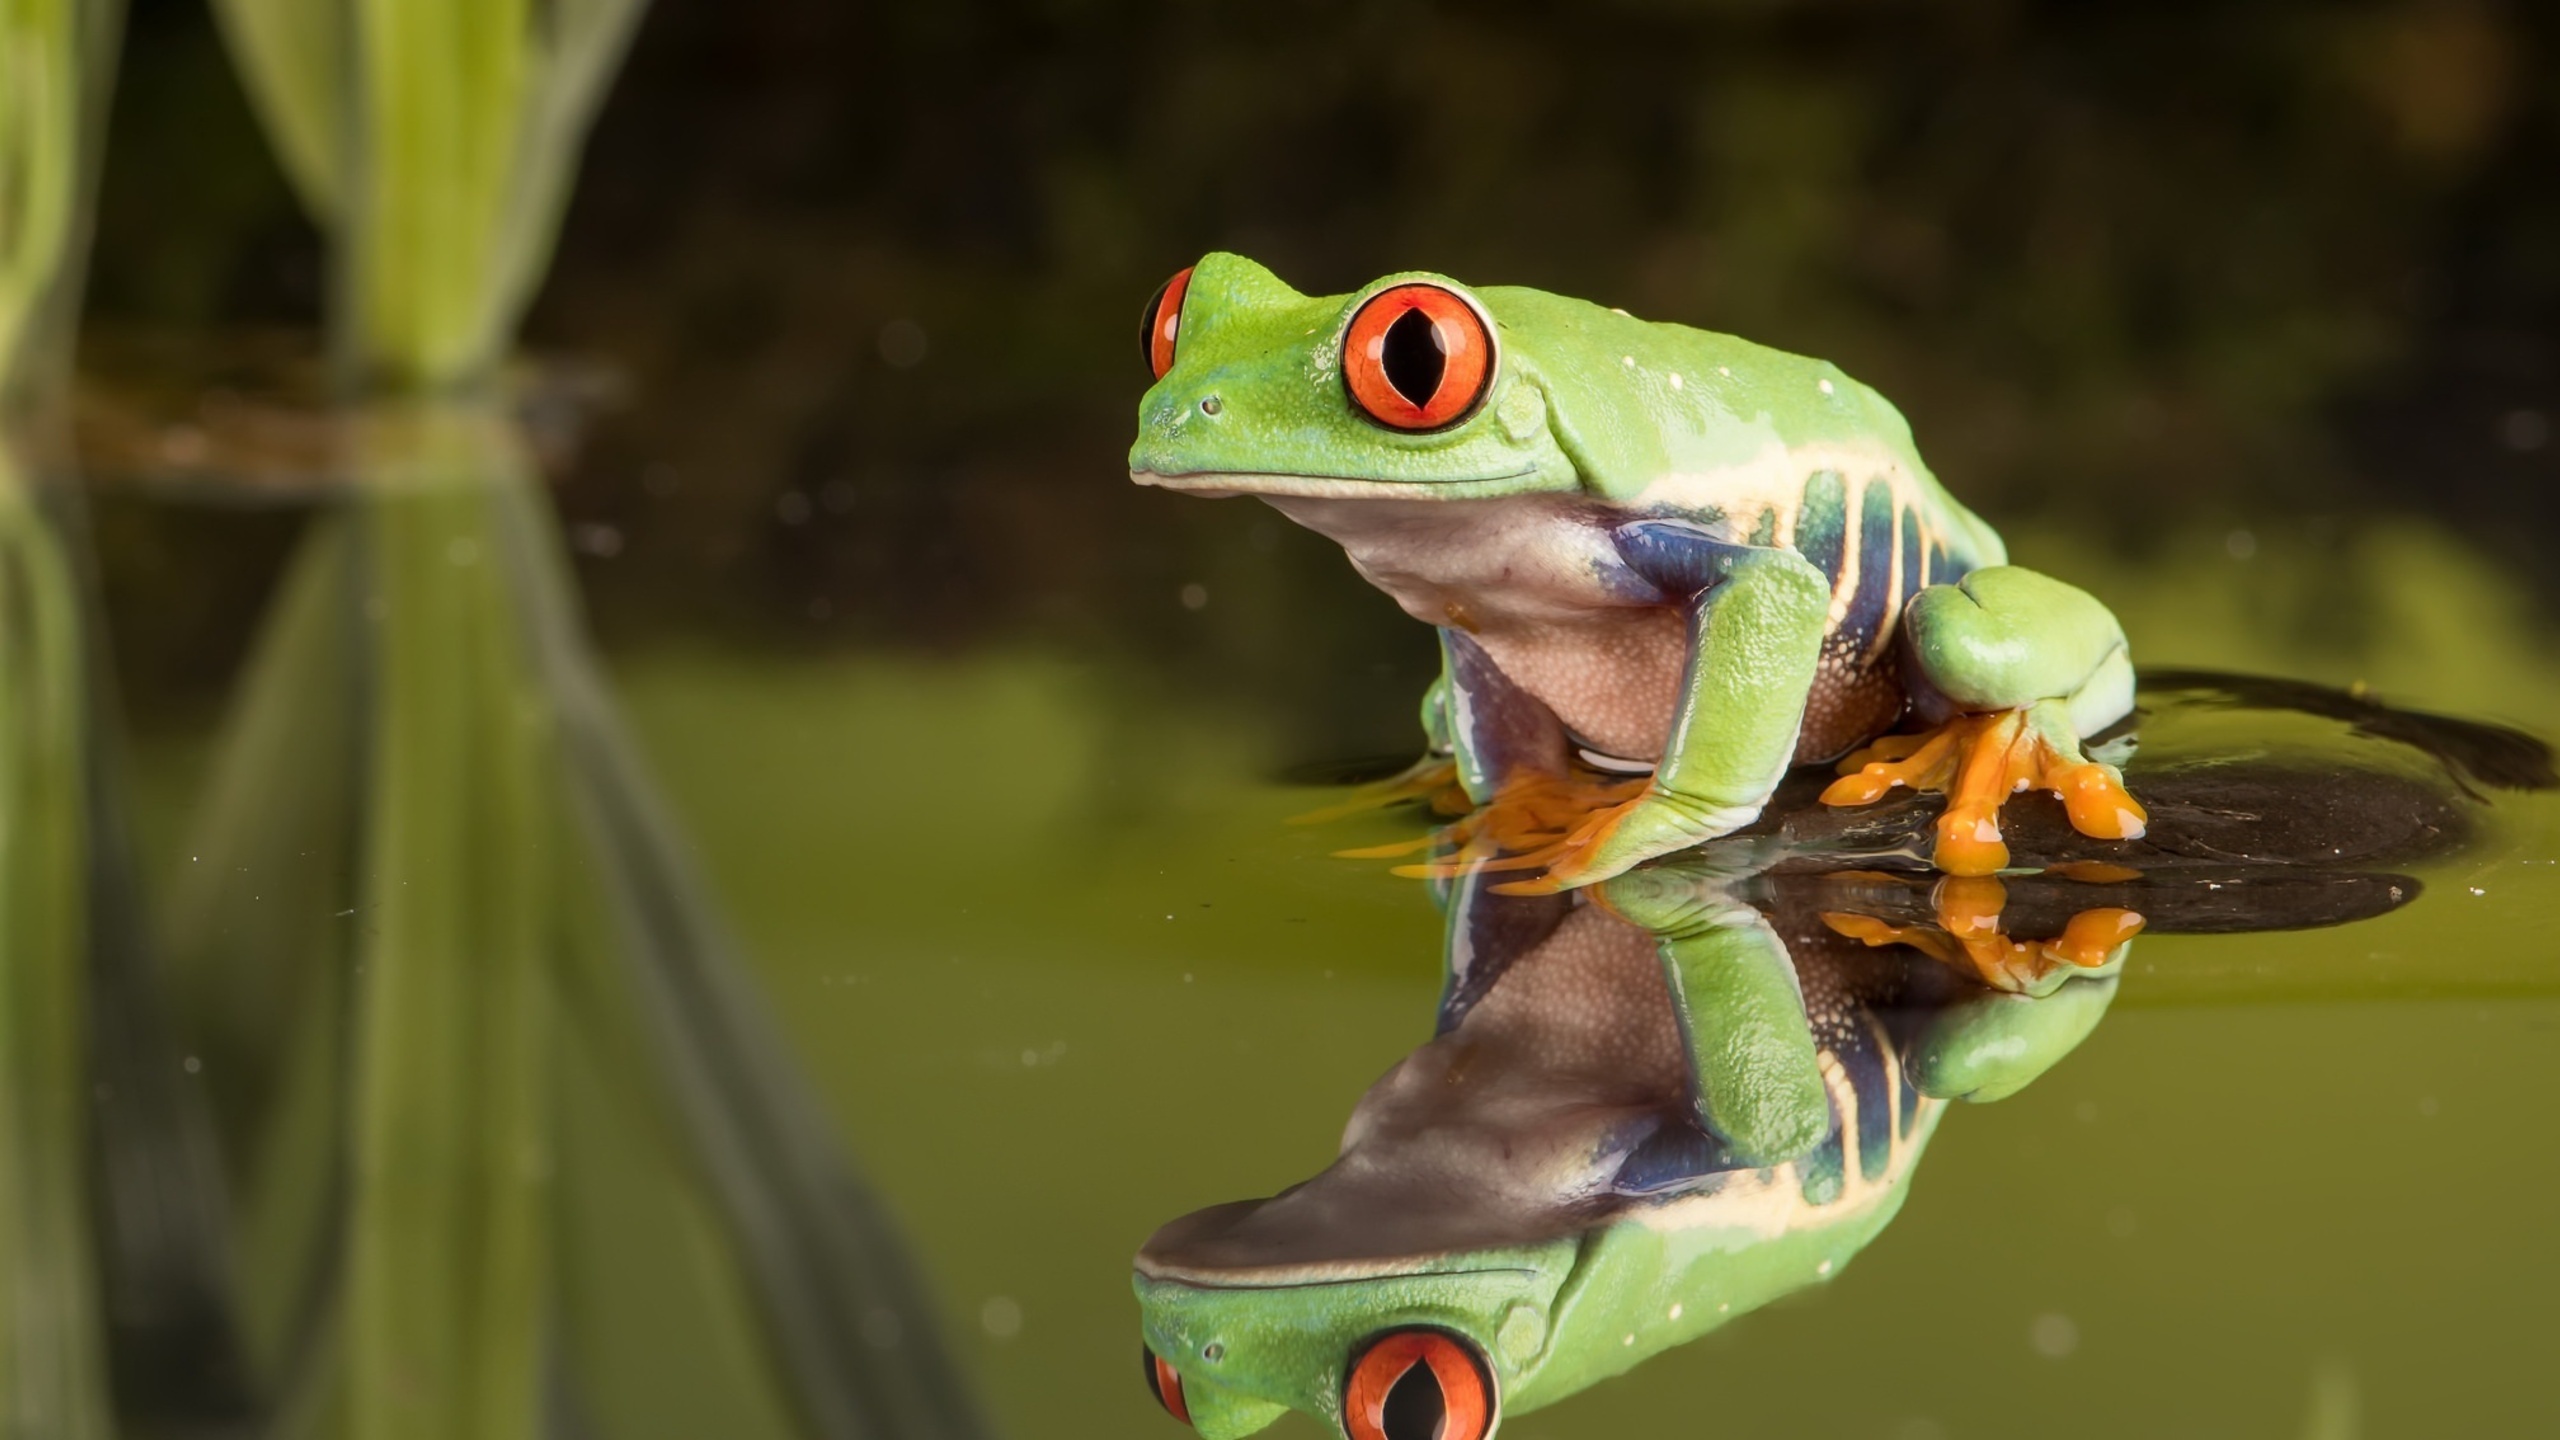 Frog wallpapers, Animal backgrounds, Wallpaper collection, Nature-themed, 2560x1440 HD Desktop